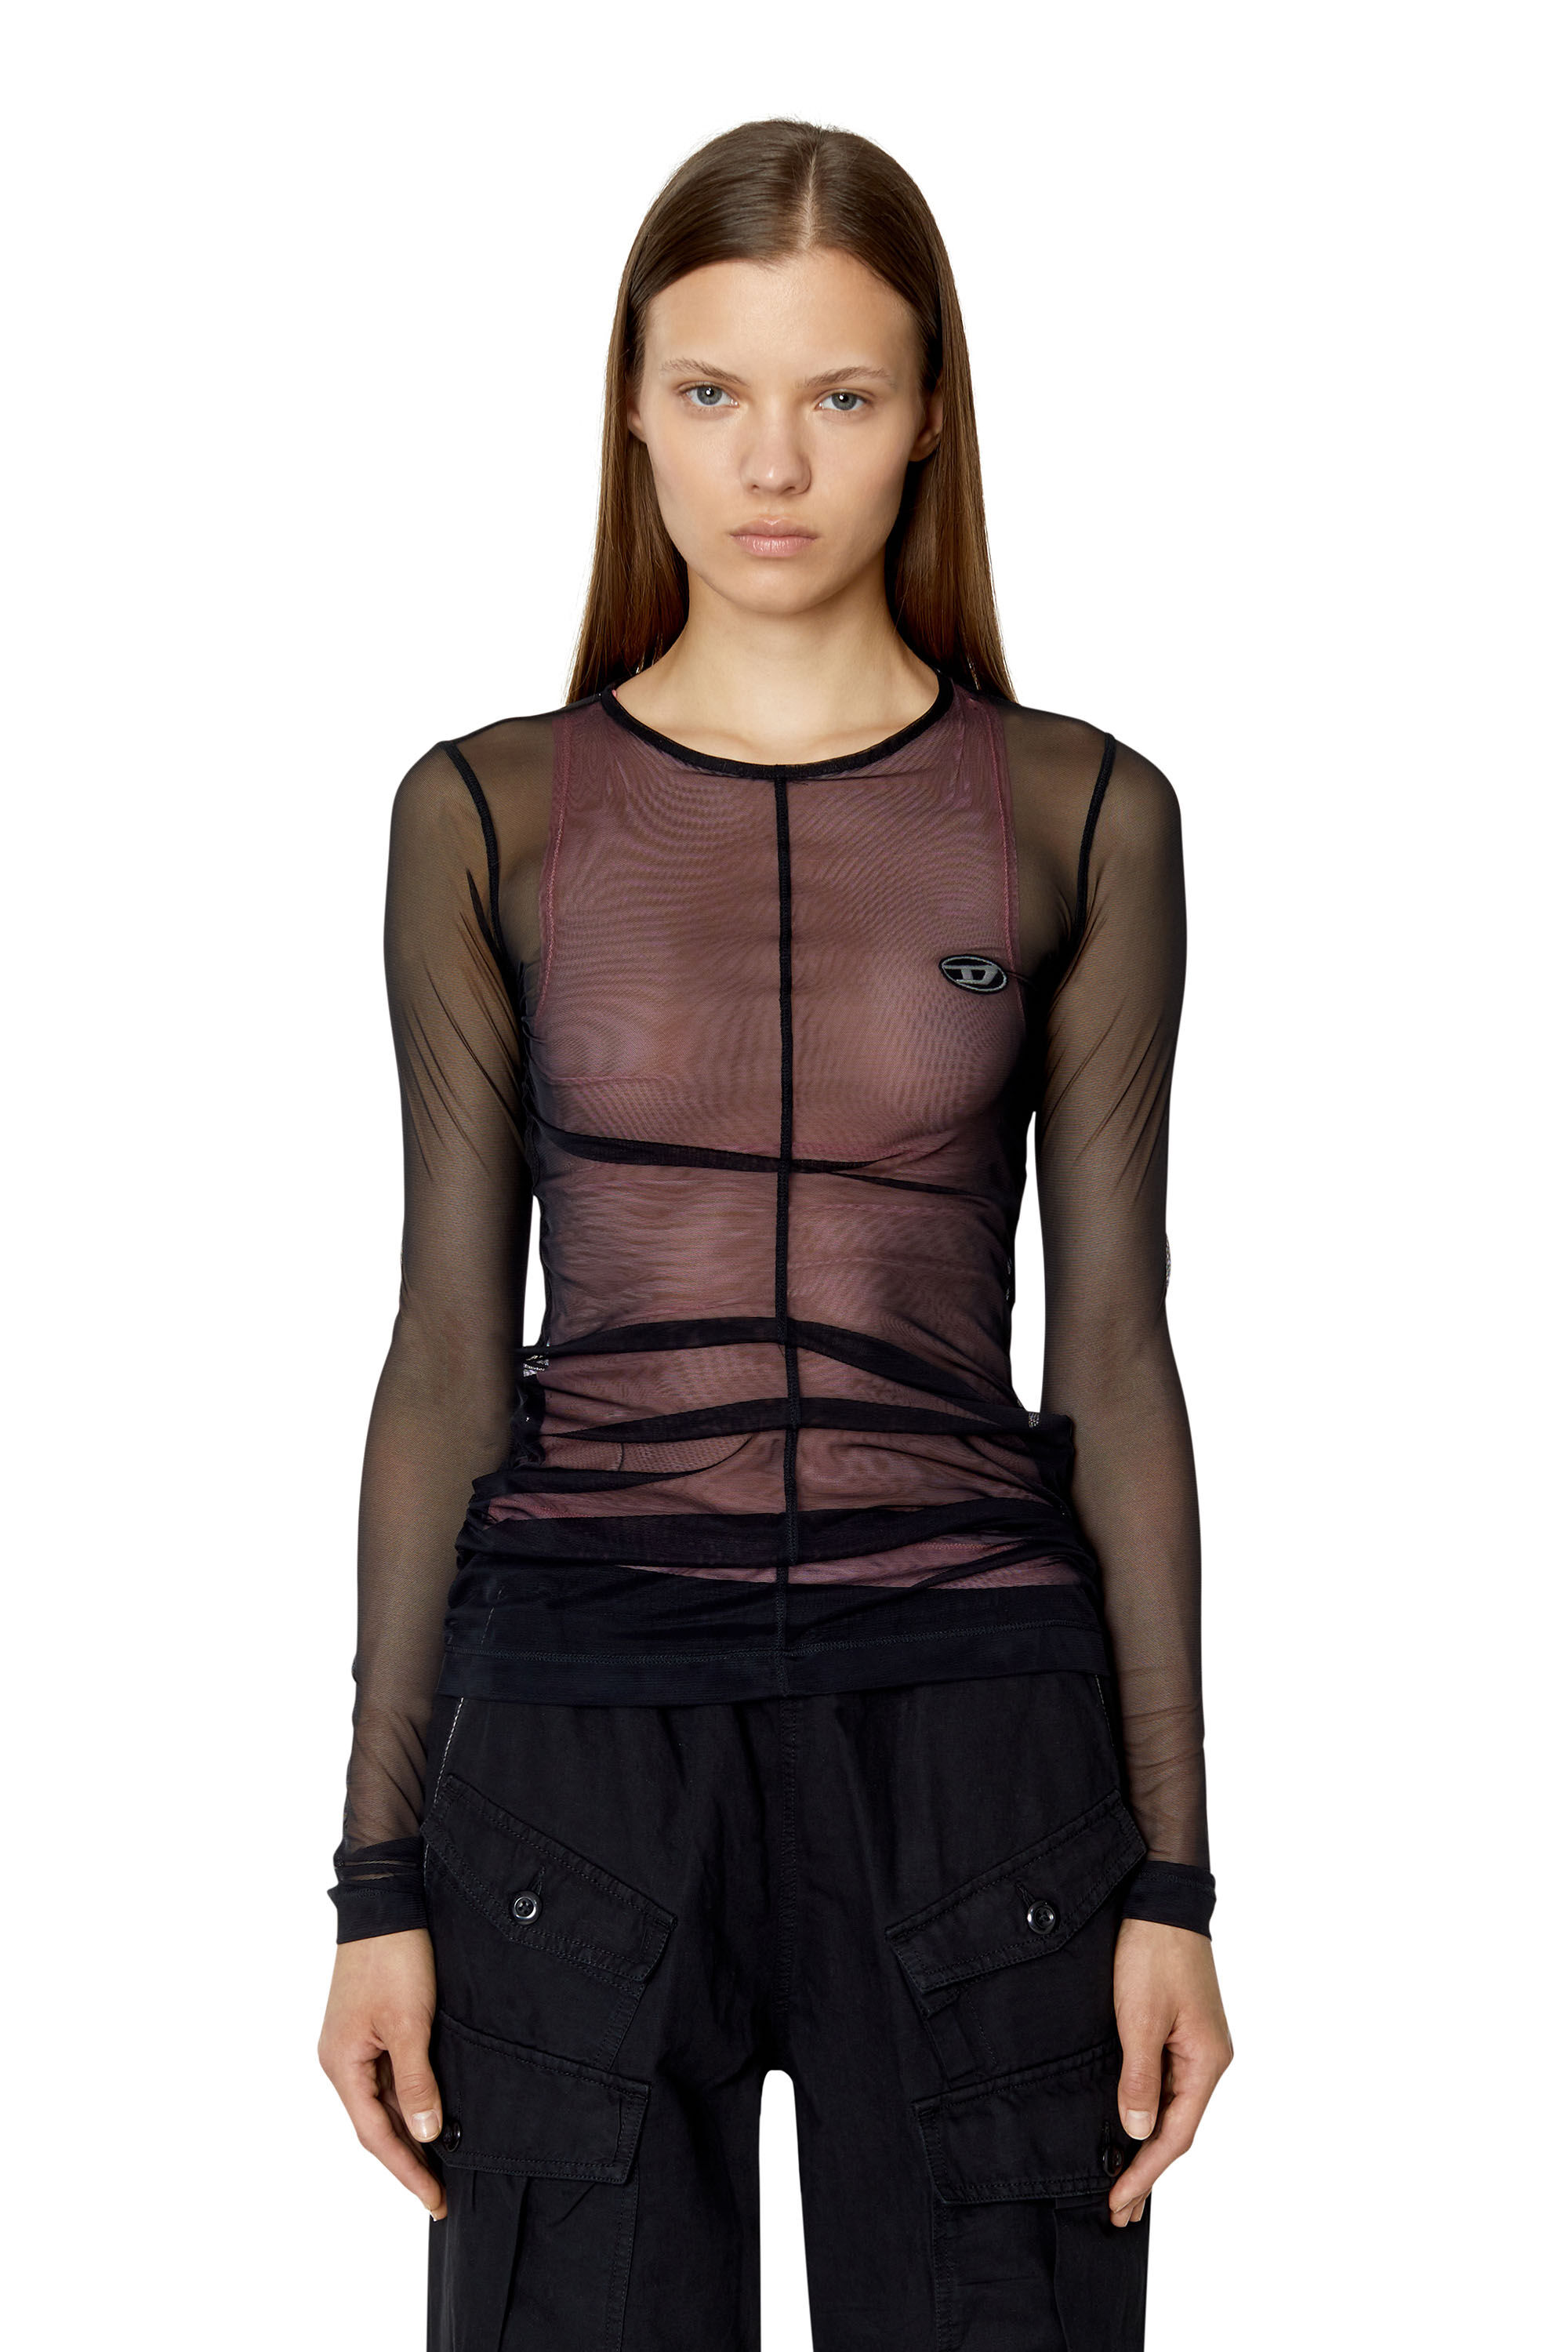 T-JURLY Woman: Double-layer mesh top | Diesel